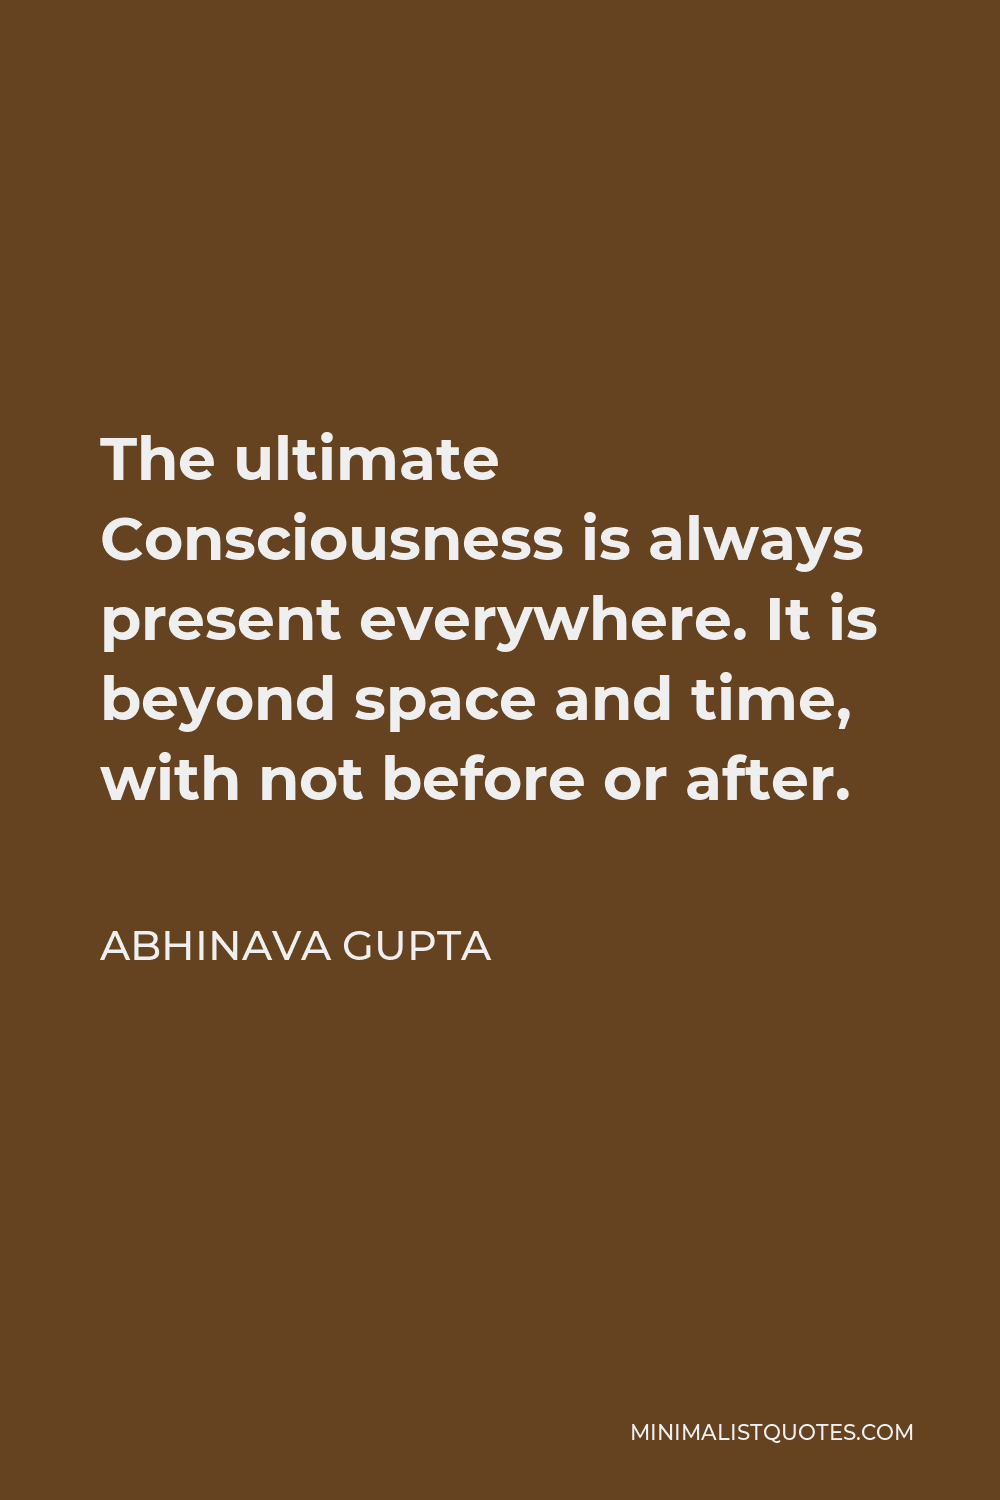 Abhinava Gupta Quote - The ultimate Consciousness is always present everywhere. It is beyond space and time, with not before or after.